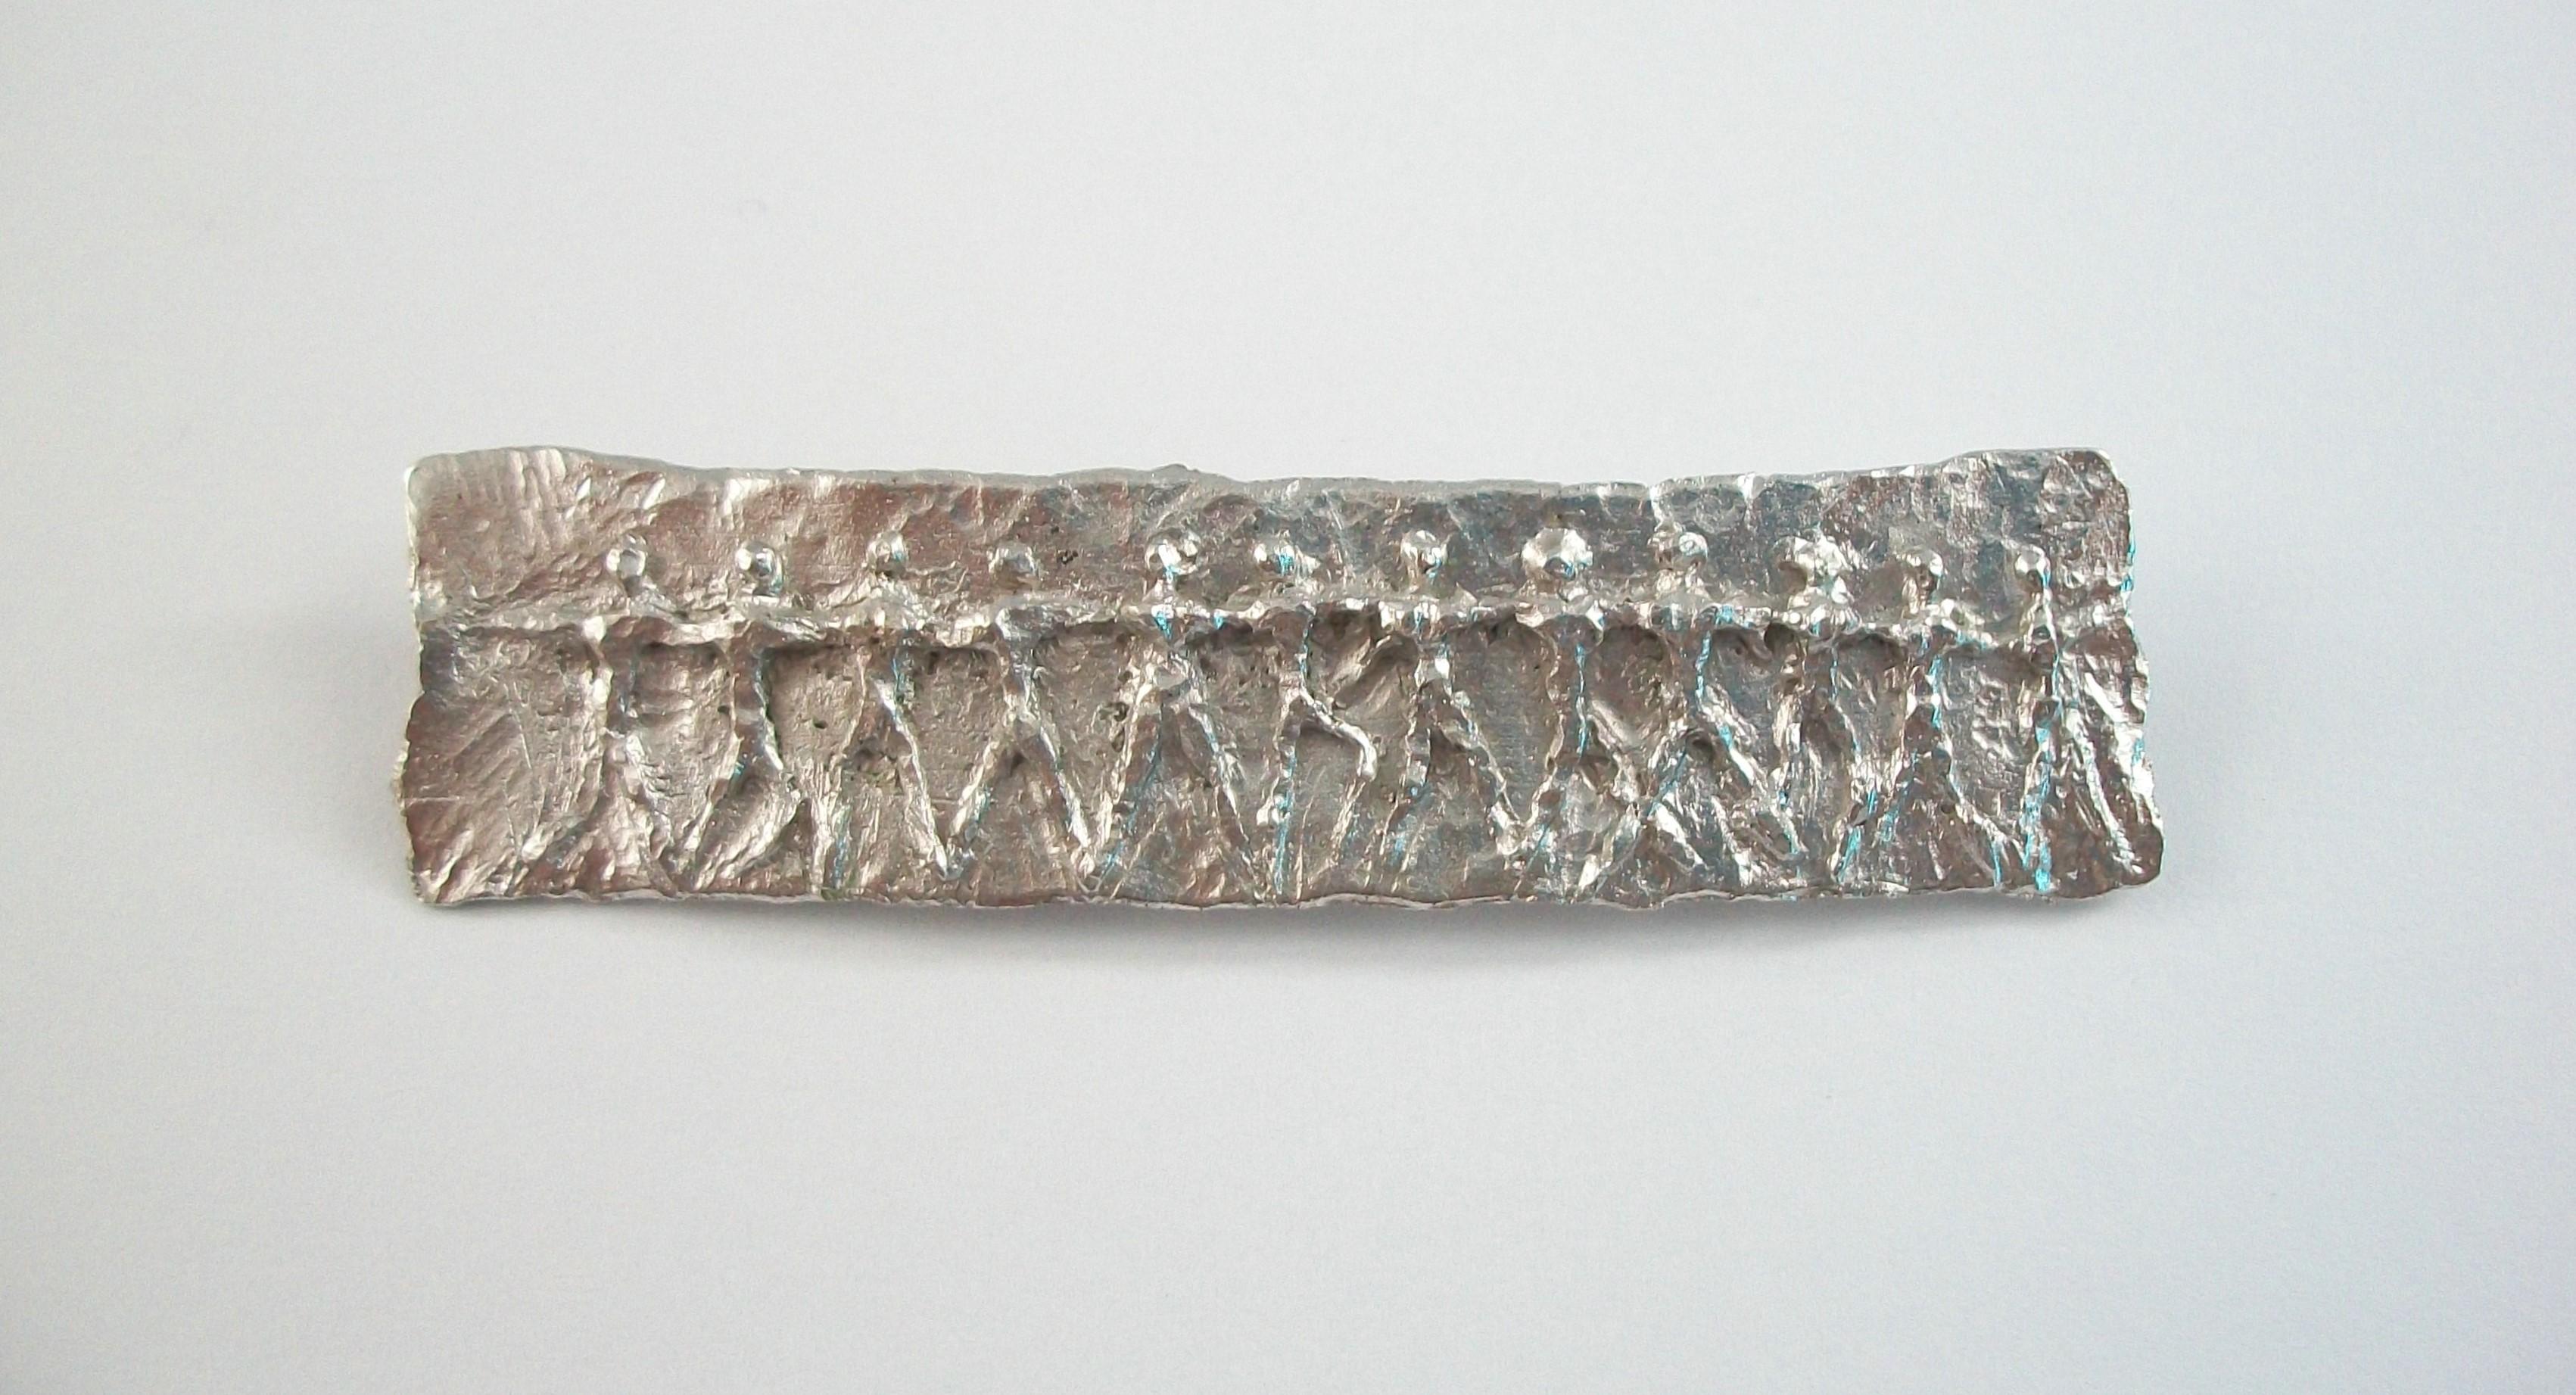 Modernist figurative 800 silver bar brooch - featuring a cast figure in motion - hand made - original hinge, pin and catch to the back - S.P. hallmark and 800 stamped on the pin (unknown/unidentified artist/maker) - Germany (likely) - mid 20th